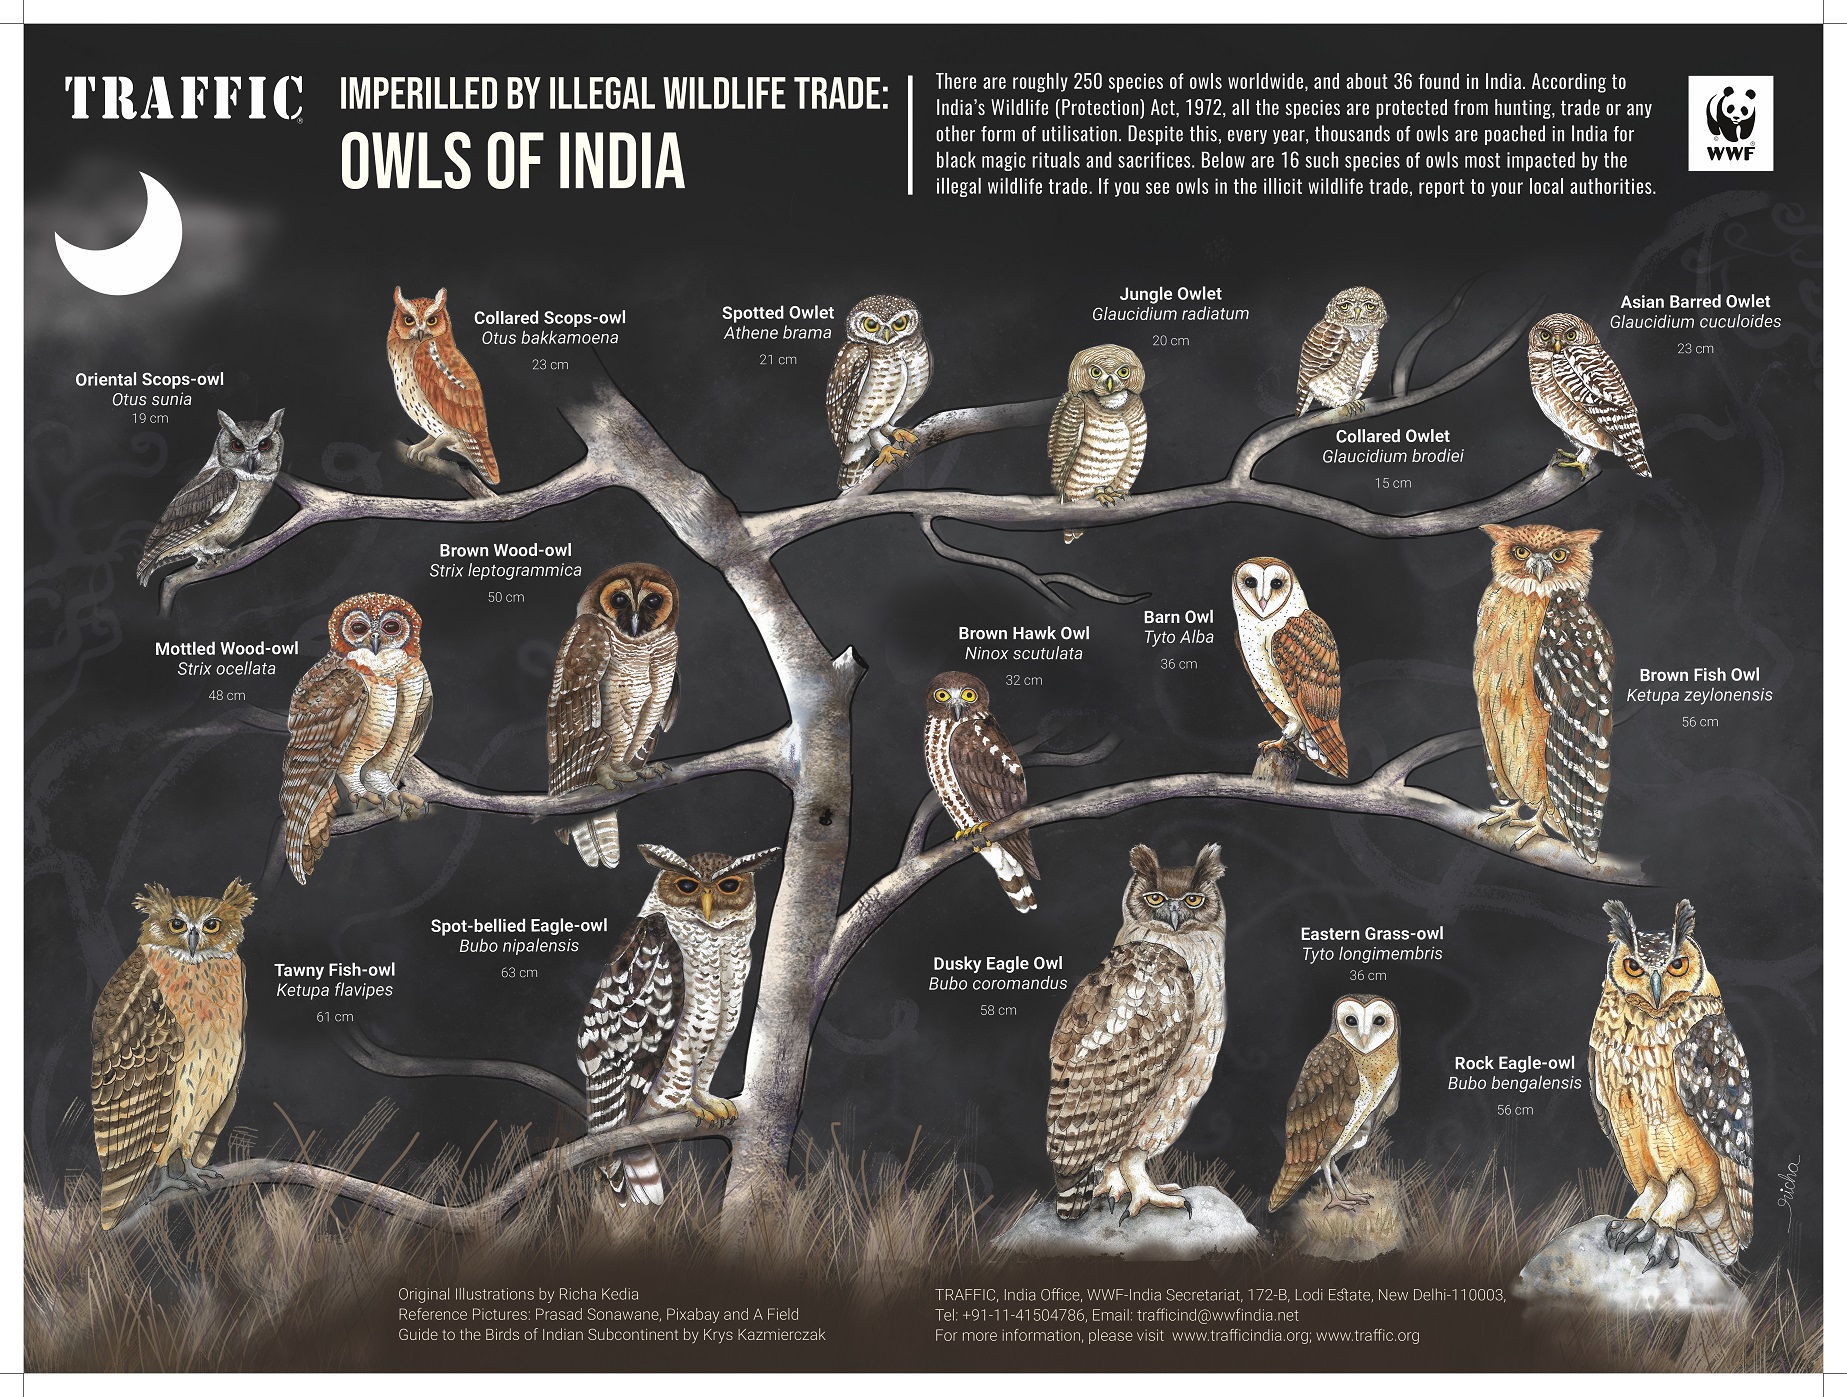 16 species of owls that are commonly trafficked in the illegal wildlife trade in India.